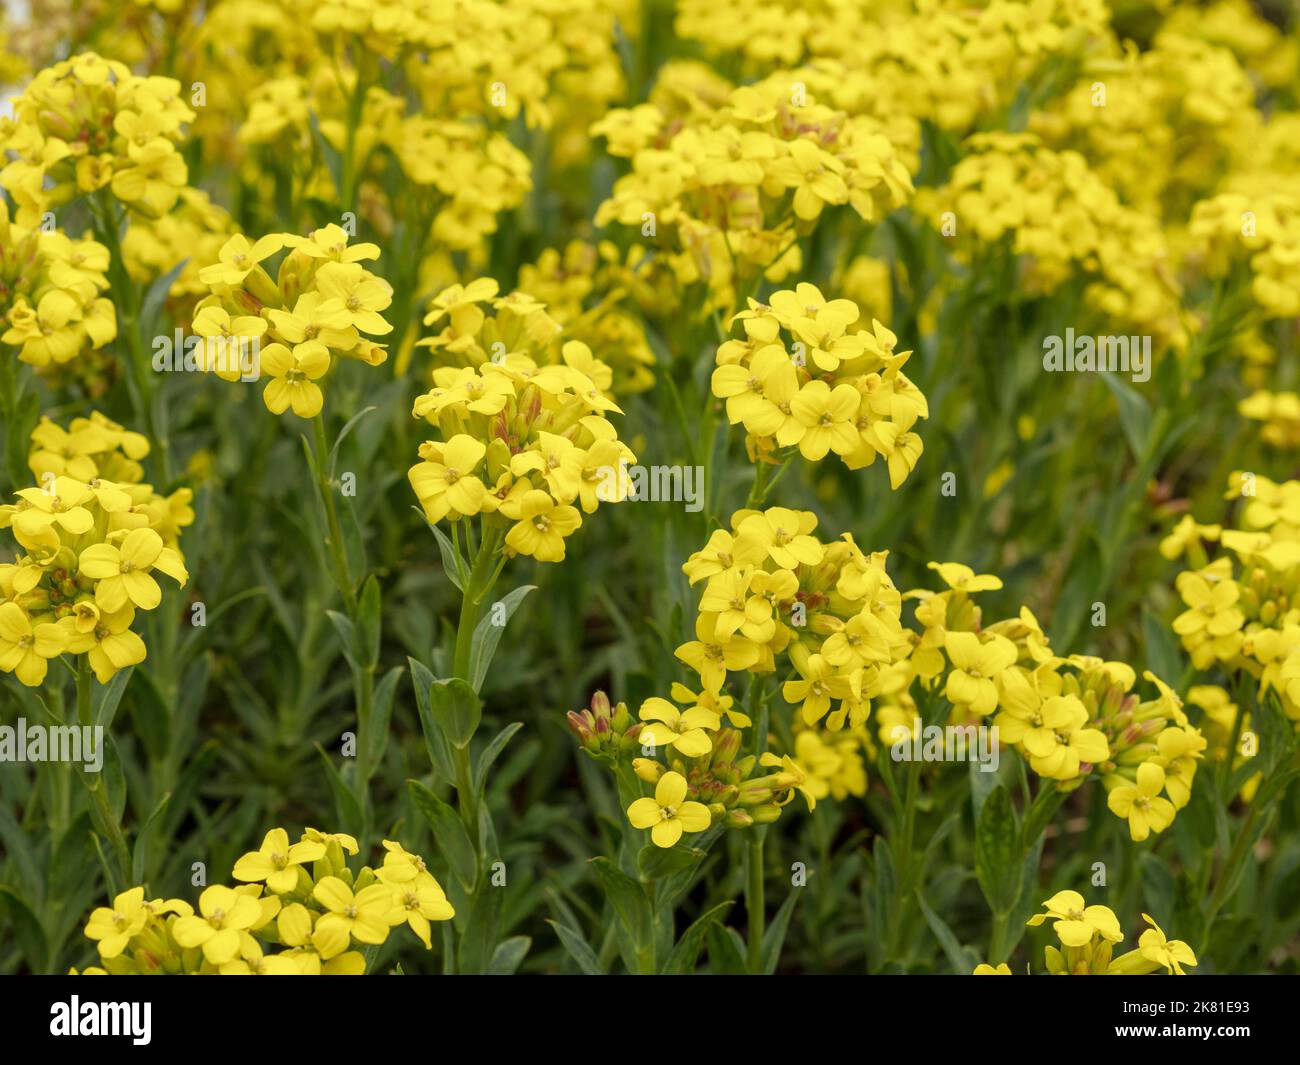 Yellow tree flax flowers in a garden Stock Photo